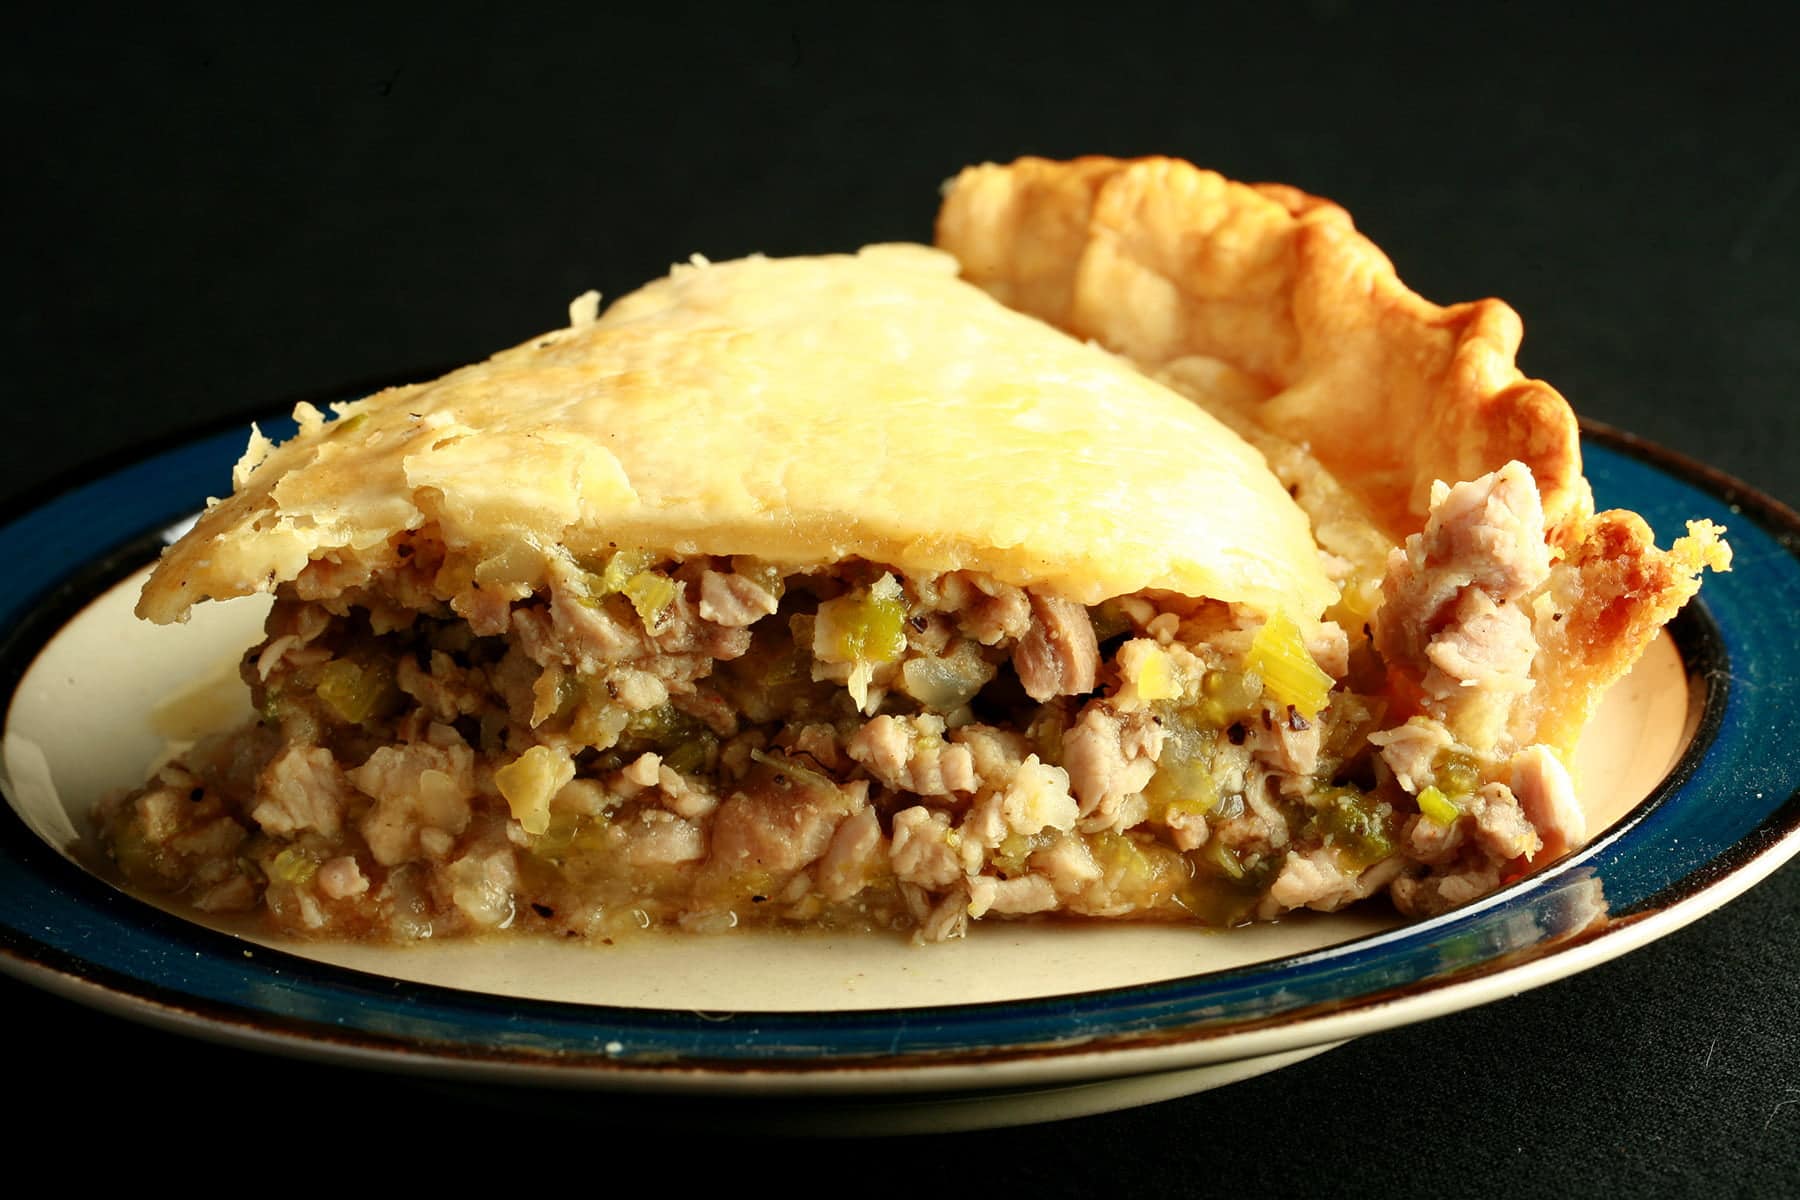 A slice of savory alligator pie, on a small white plate. The filling shows chunks of meat and vegetables, like celery.